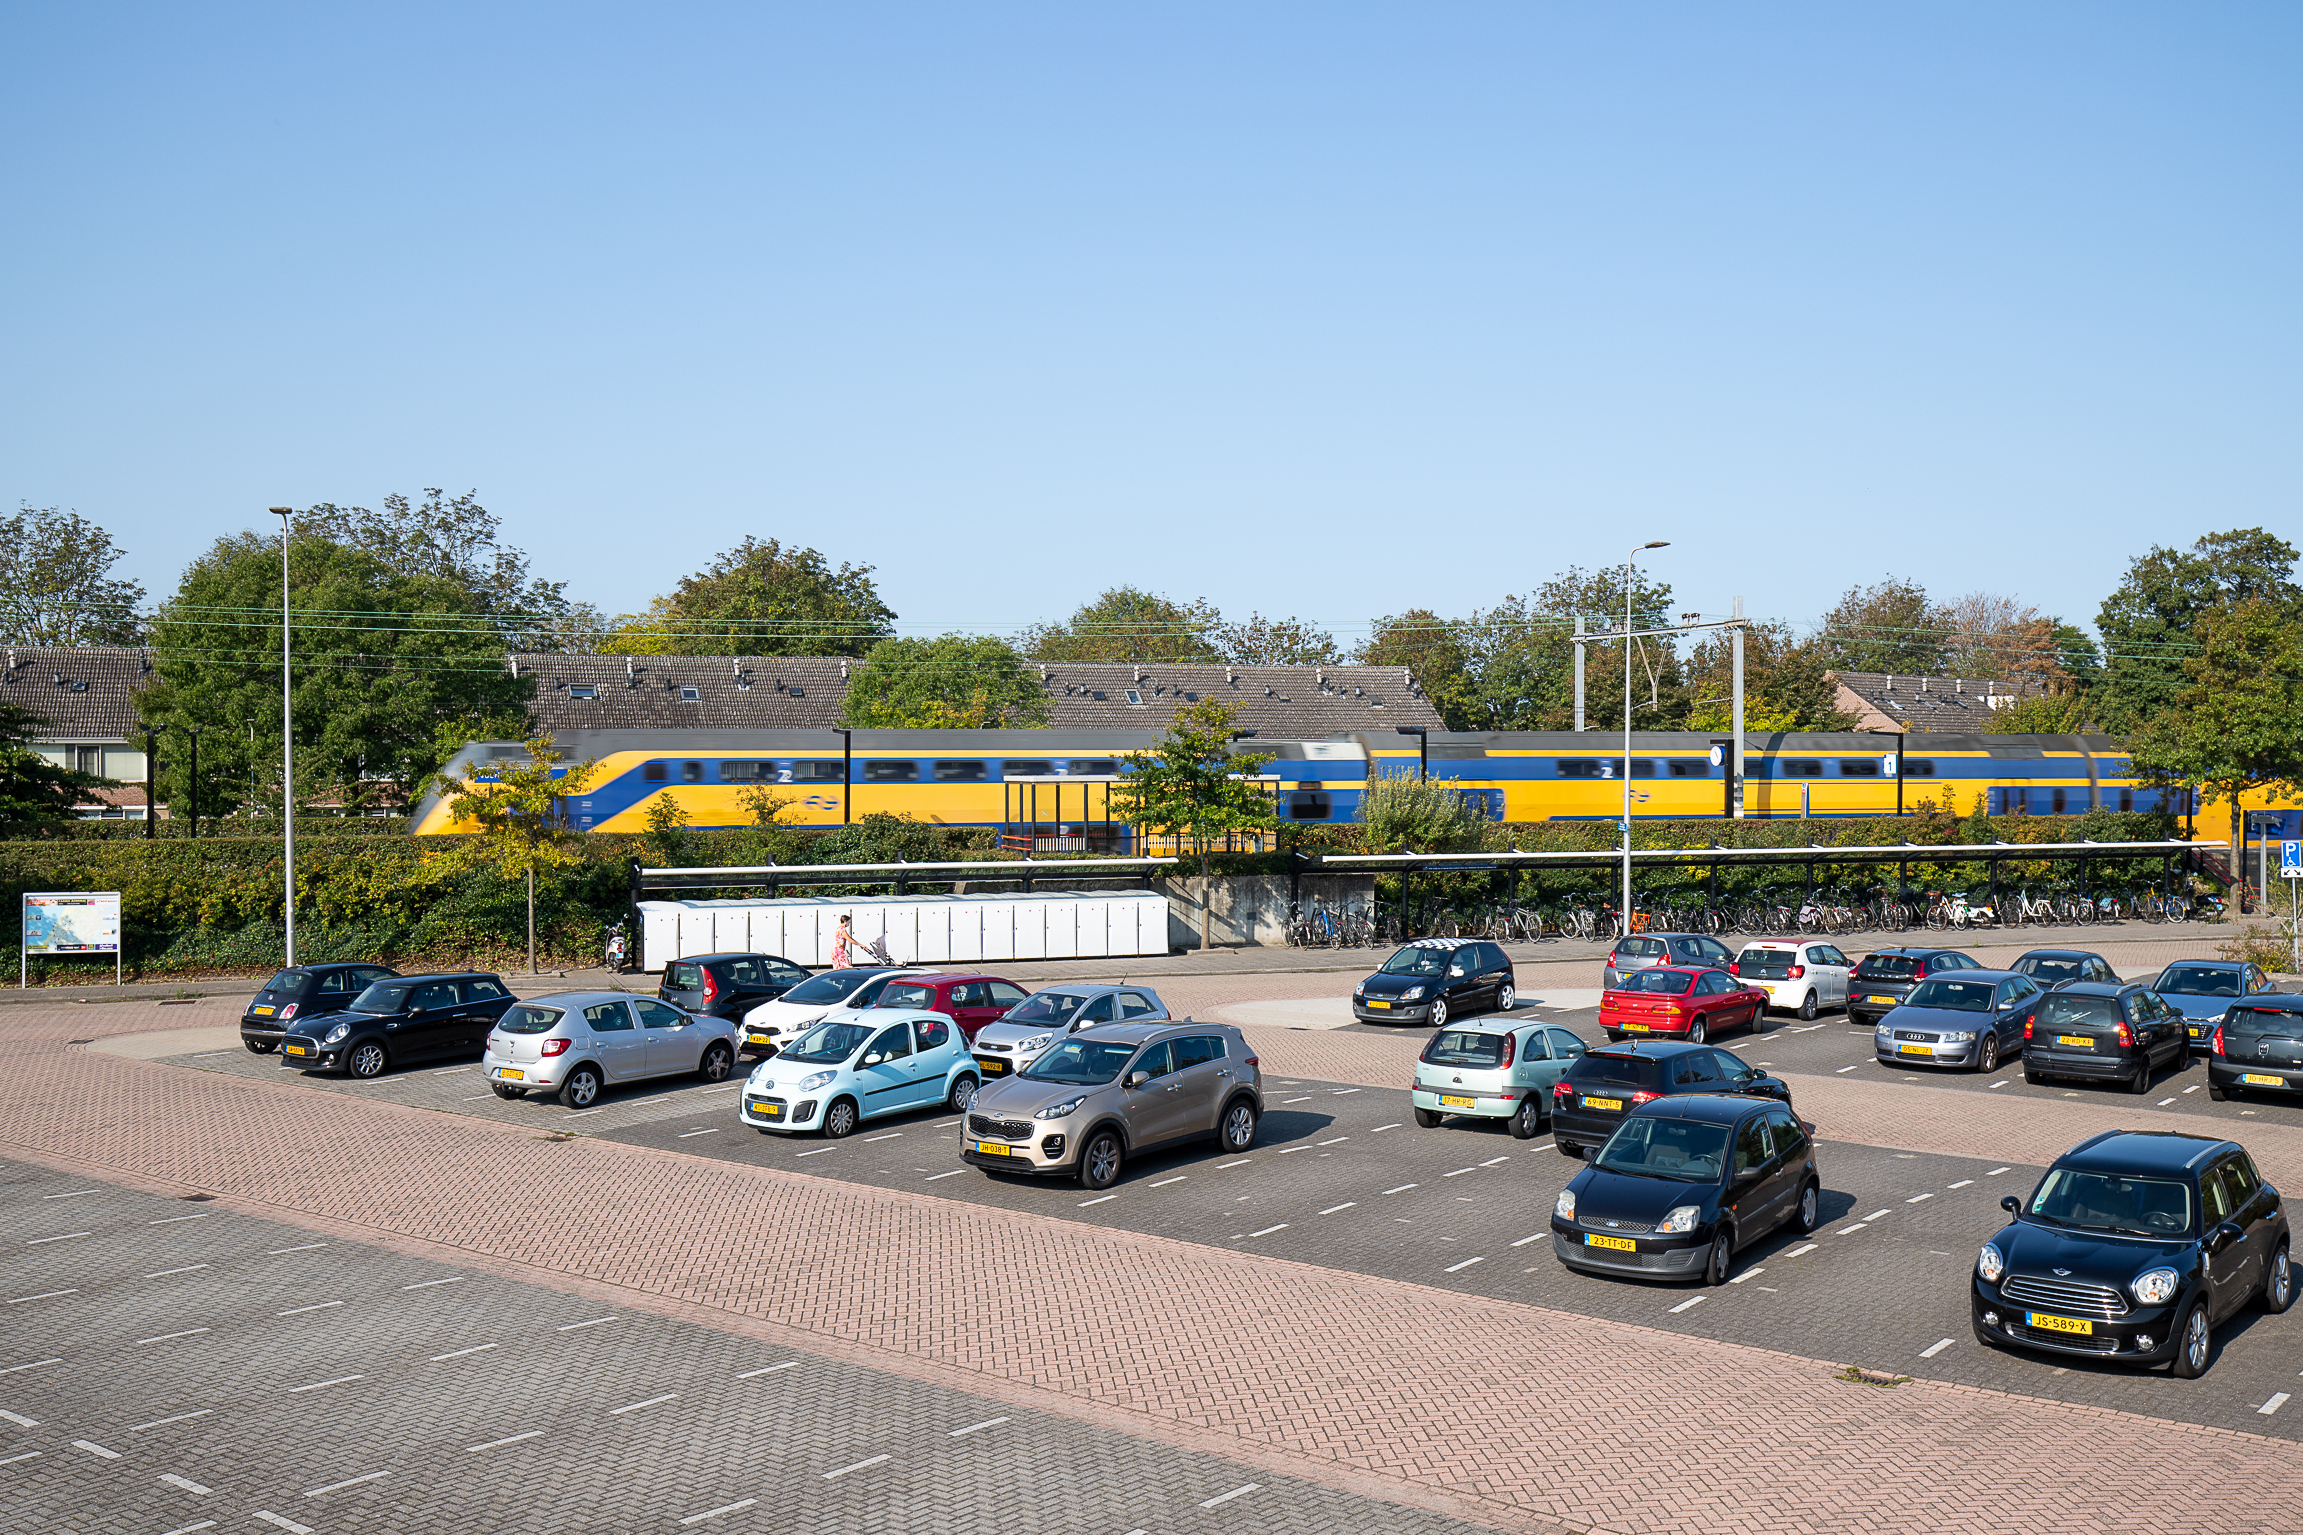 Station Voorhout